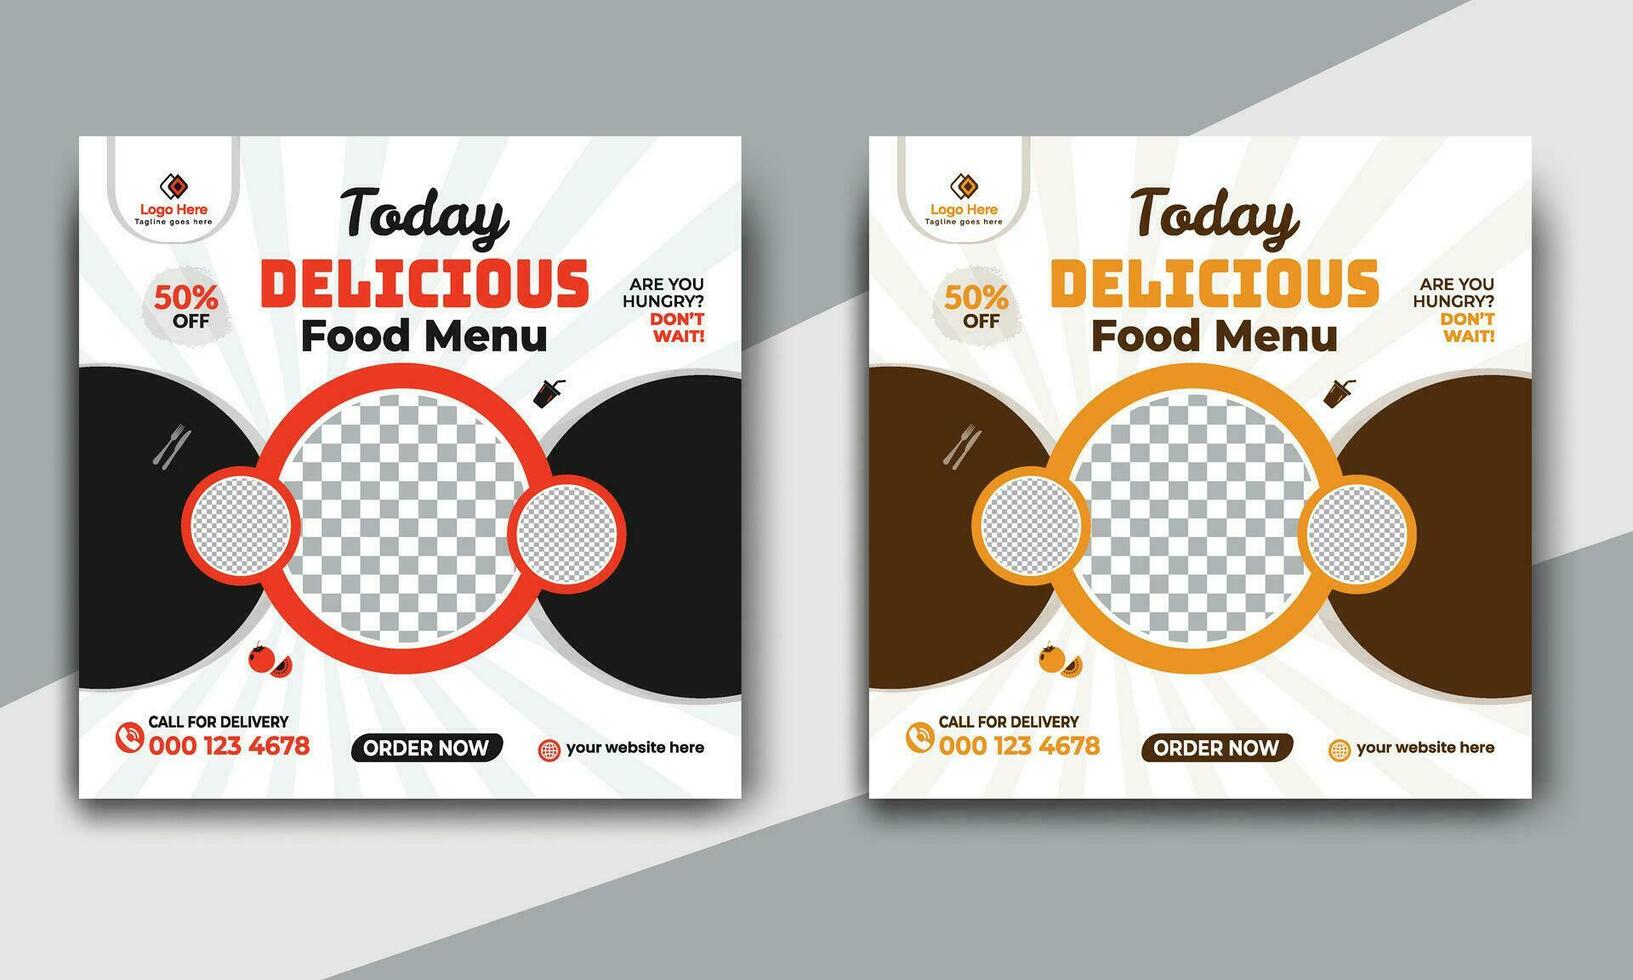 Fast food restaurant business marketing social media post or web banner template design with abstract background. Fresh pizza, burger and online sale promotion flyer vector